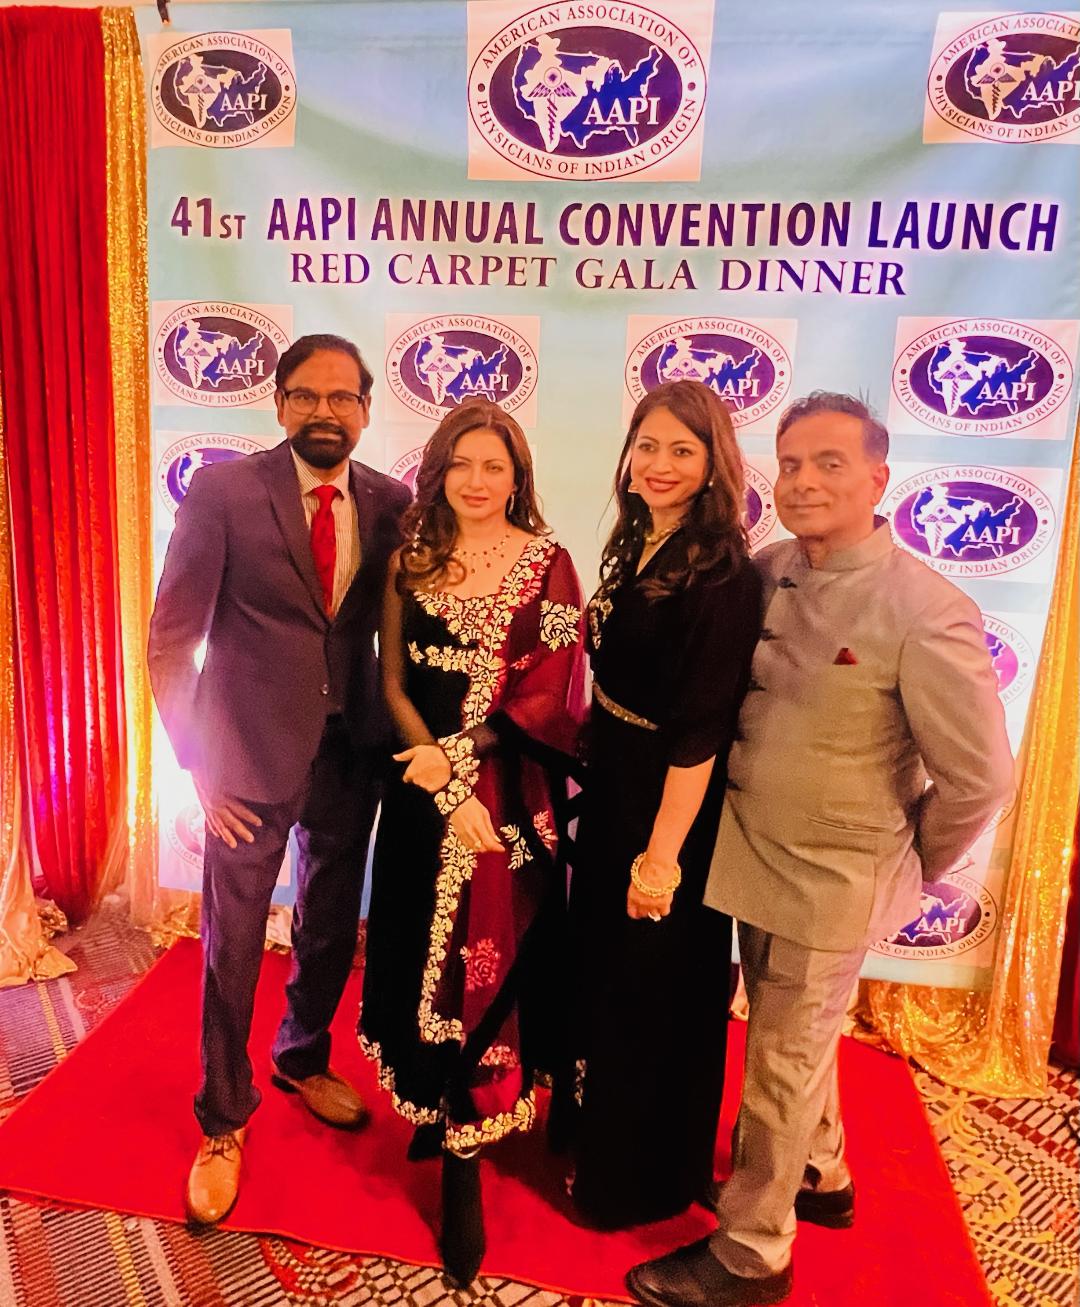 AAPI-Announces-41st-Annual-Convention-2023-During-Curtain-Raiser-In-Jew-Jersey.jpg